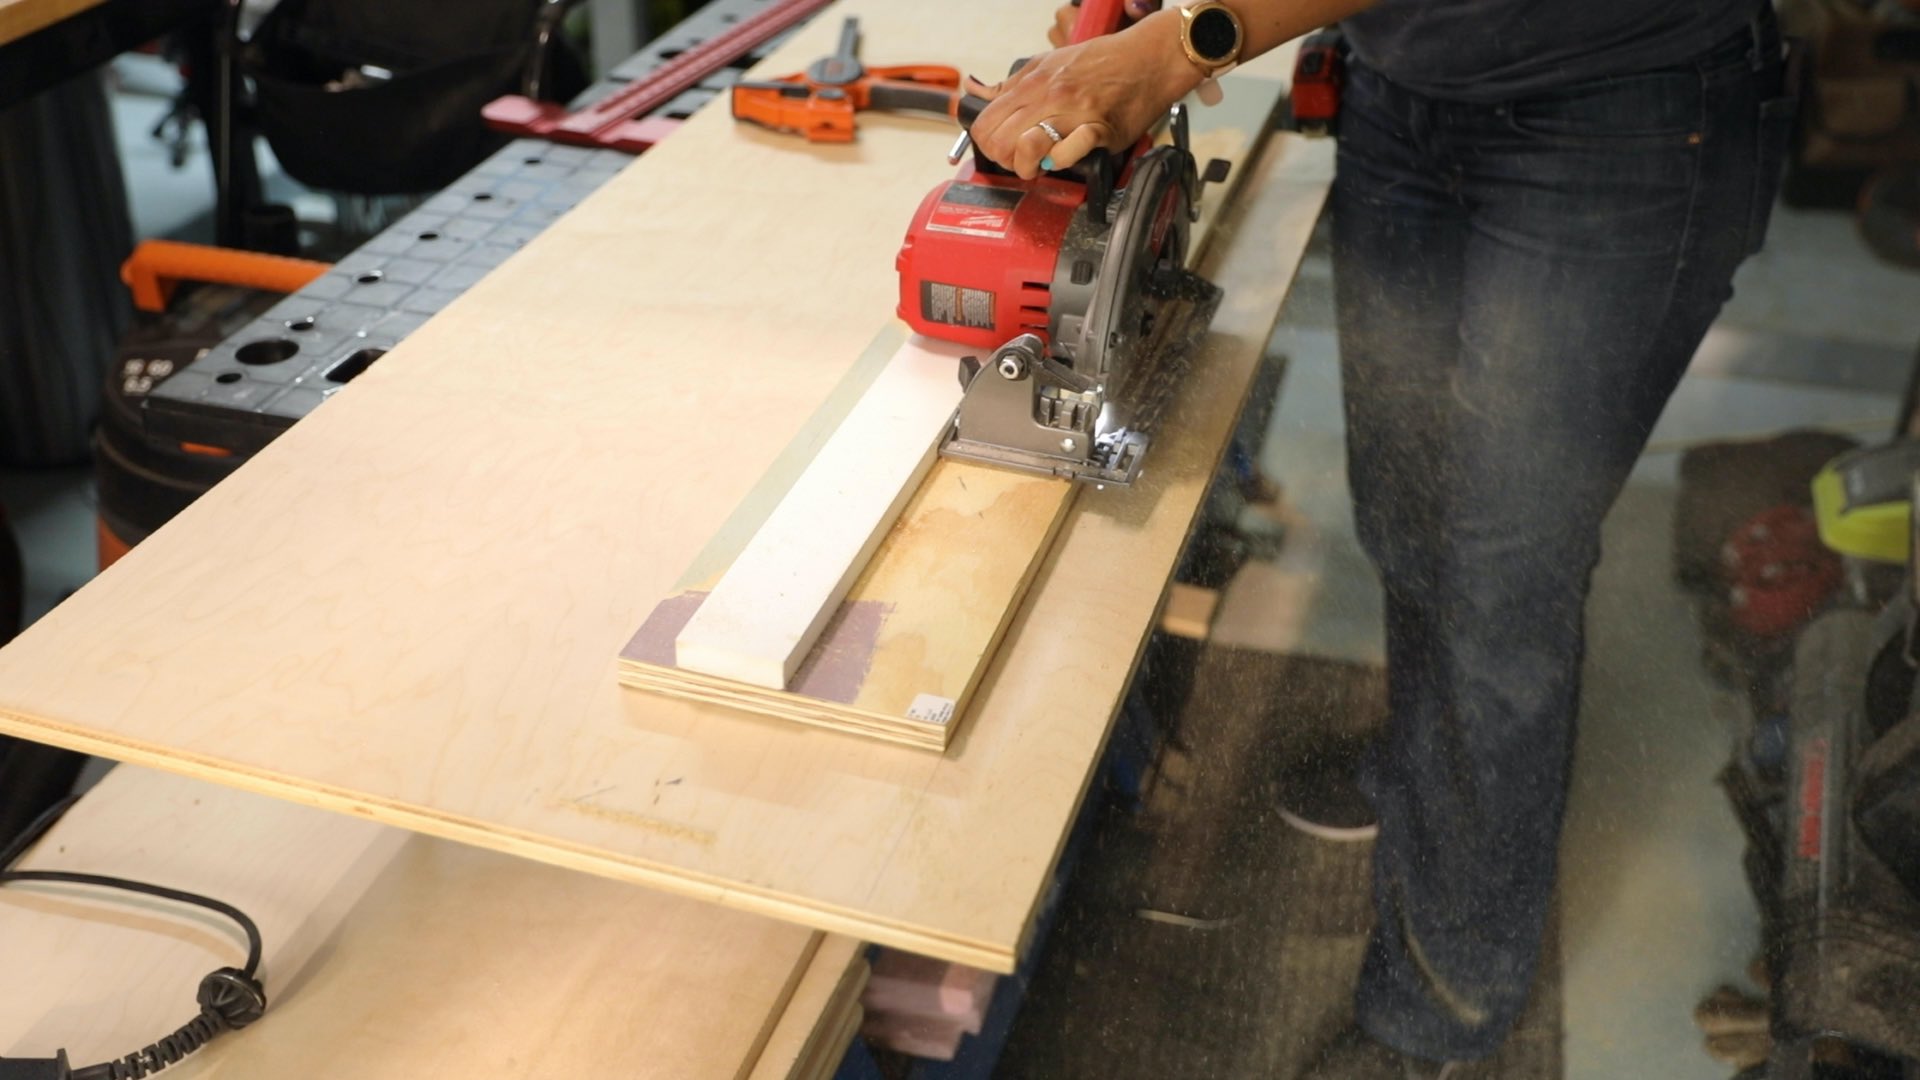 How to Build a Walk-in Closet Organizer From Scratch - Make a circular saw guide for rip cutting plywood. - Thrift Diving